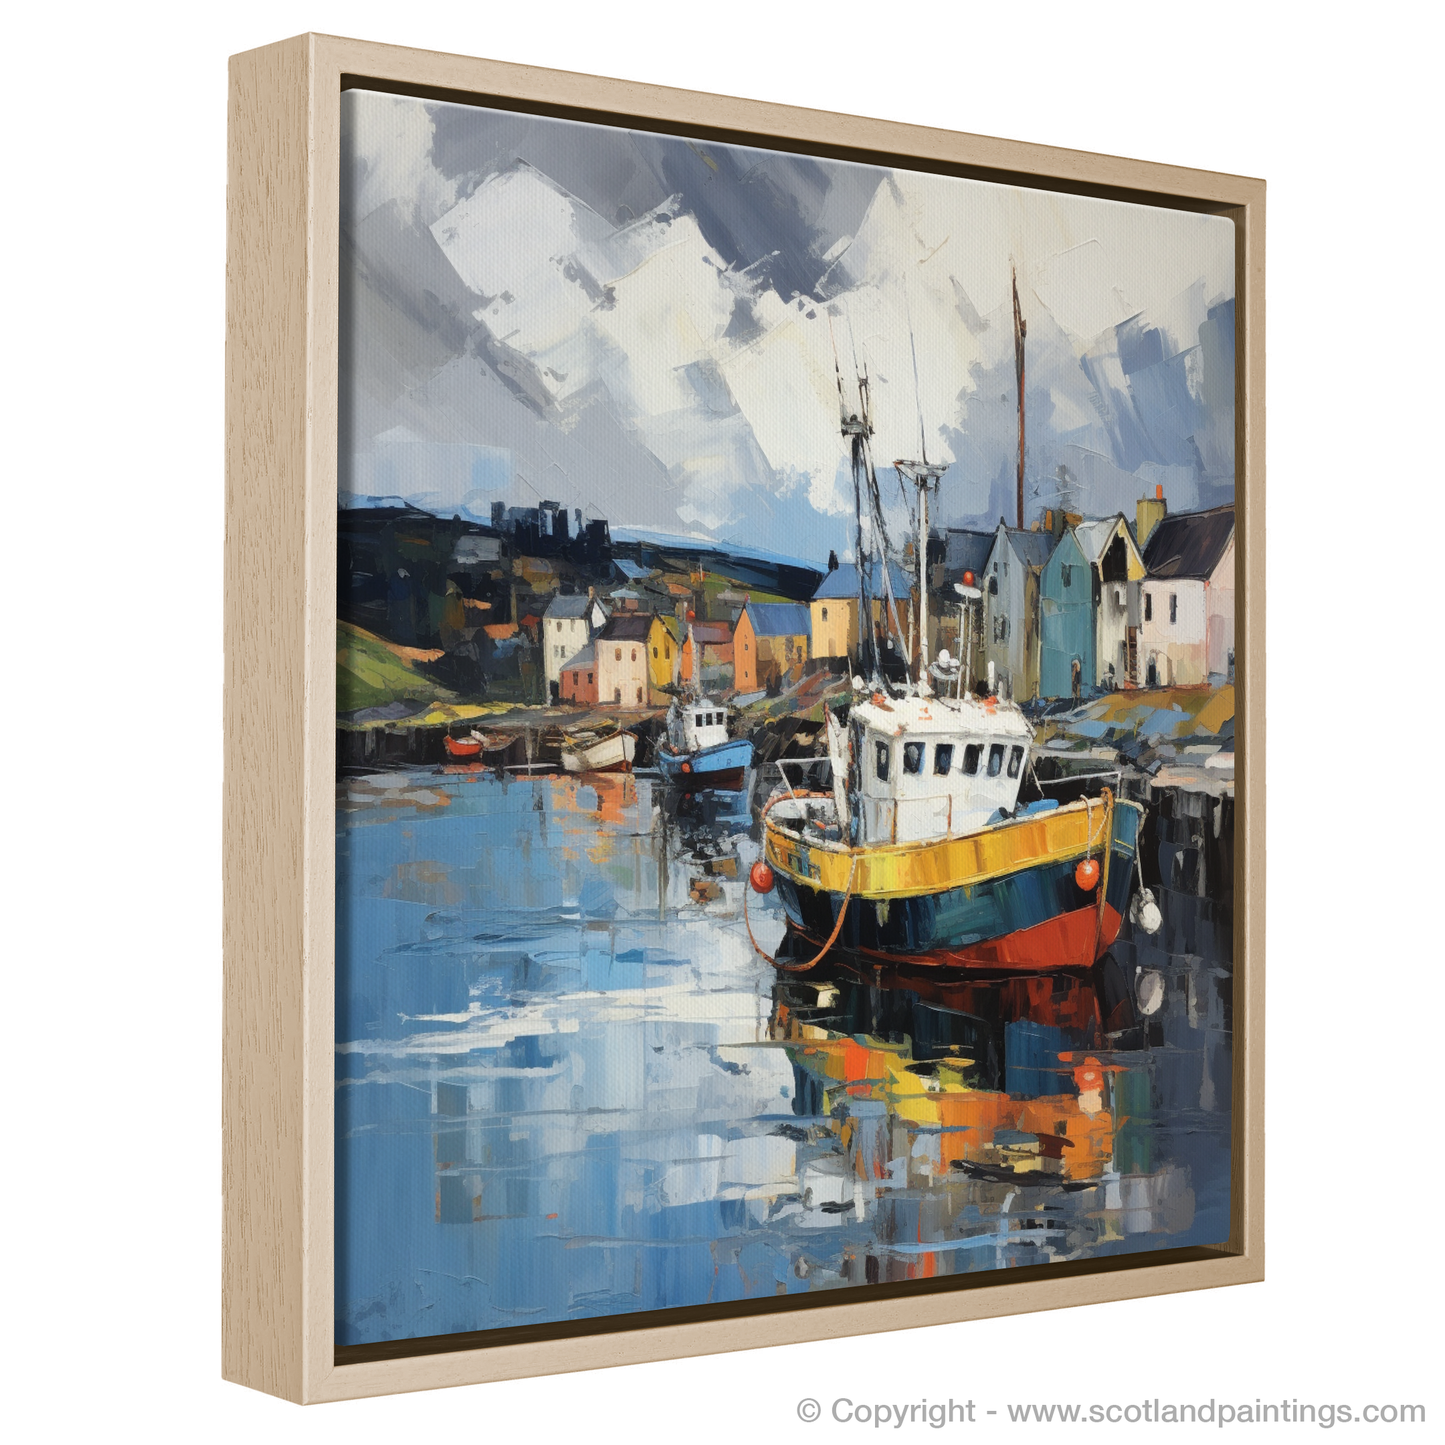 Painting and Art Print of Cromarty Harbour with a stormy sky entitled "Tempest over Cromarty Harbour".